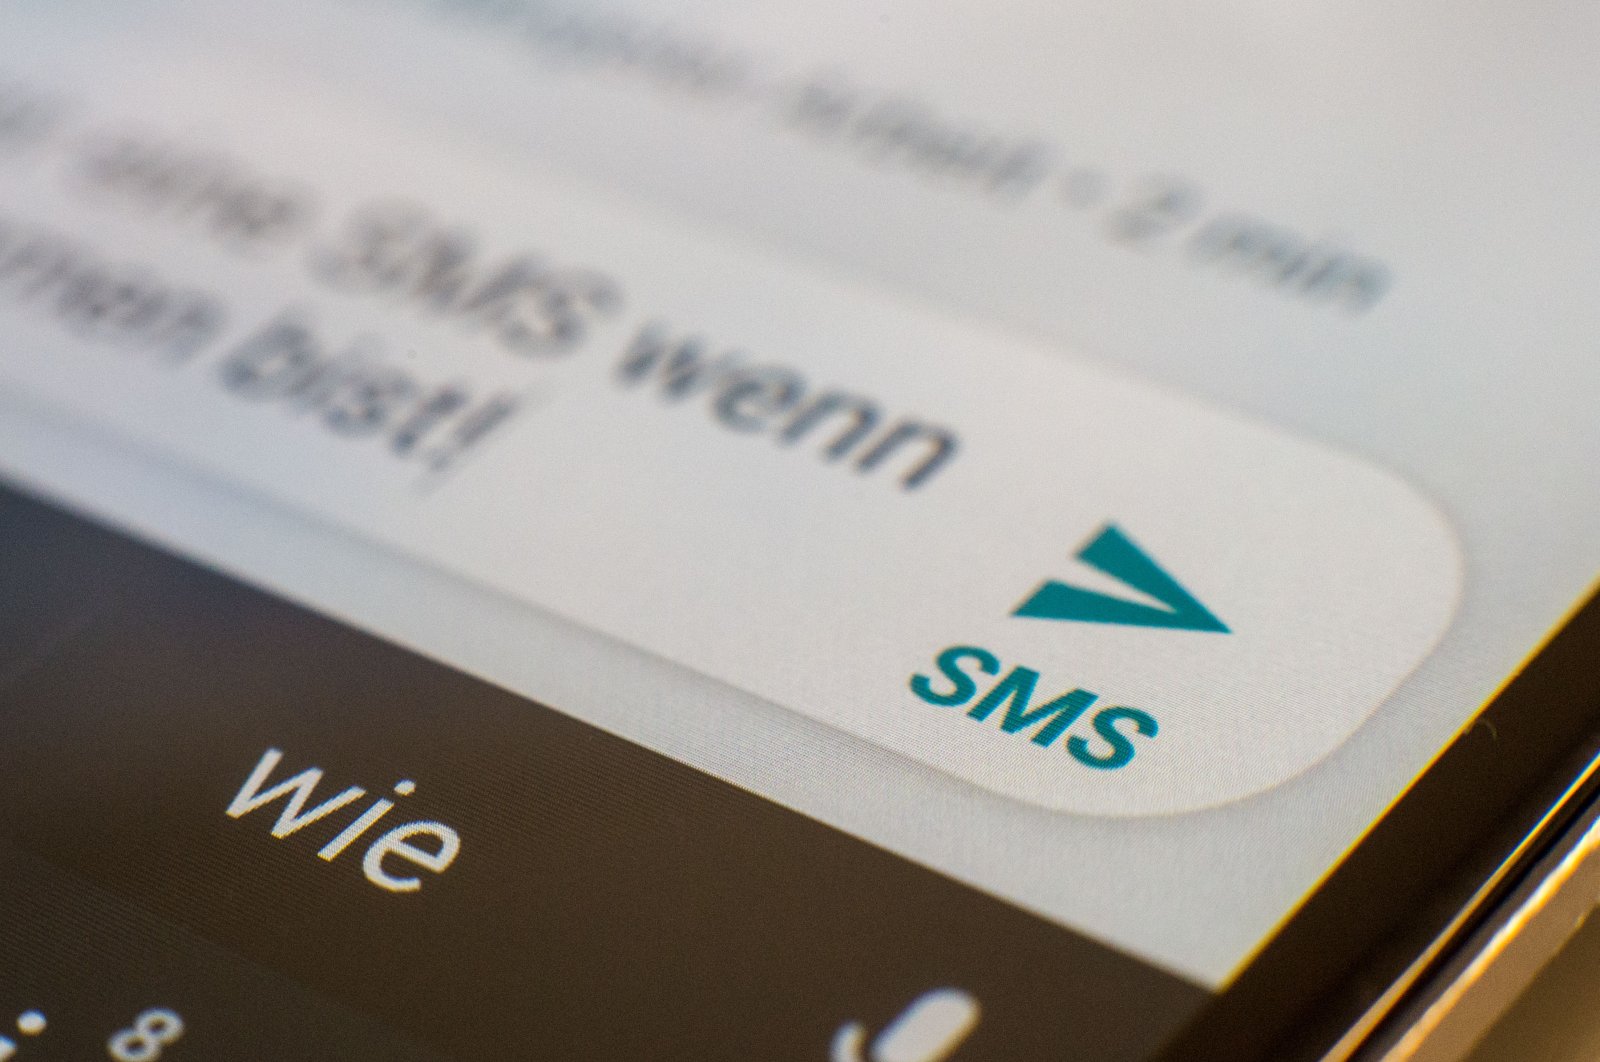 Initially ridiculed as niche tech that nobody would use, SMS soon conquered the world of mobile communications, only to be ousted again by WhatsApp. (dpa Photo)